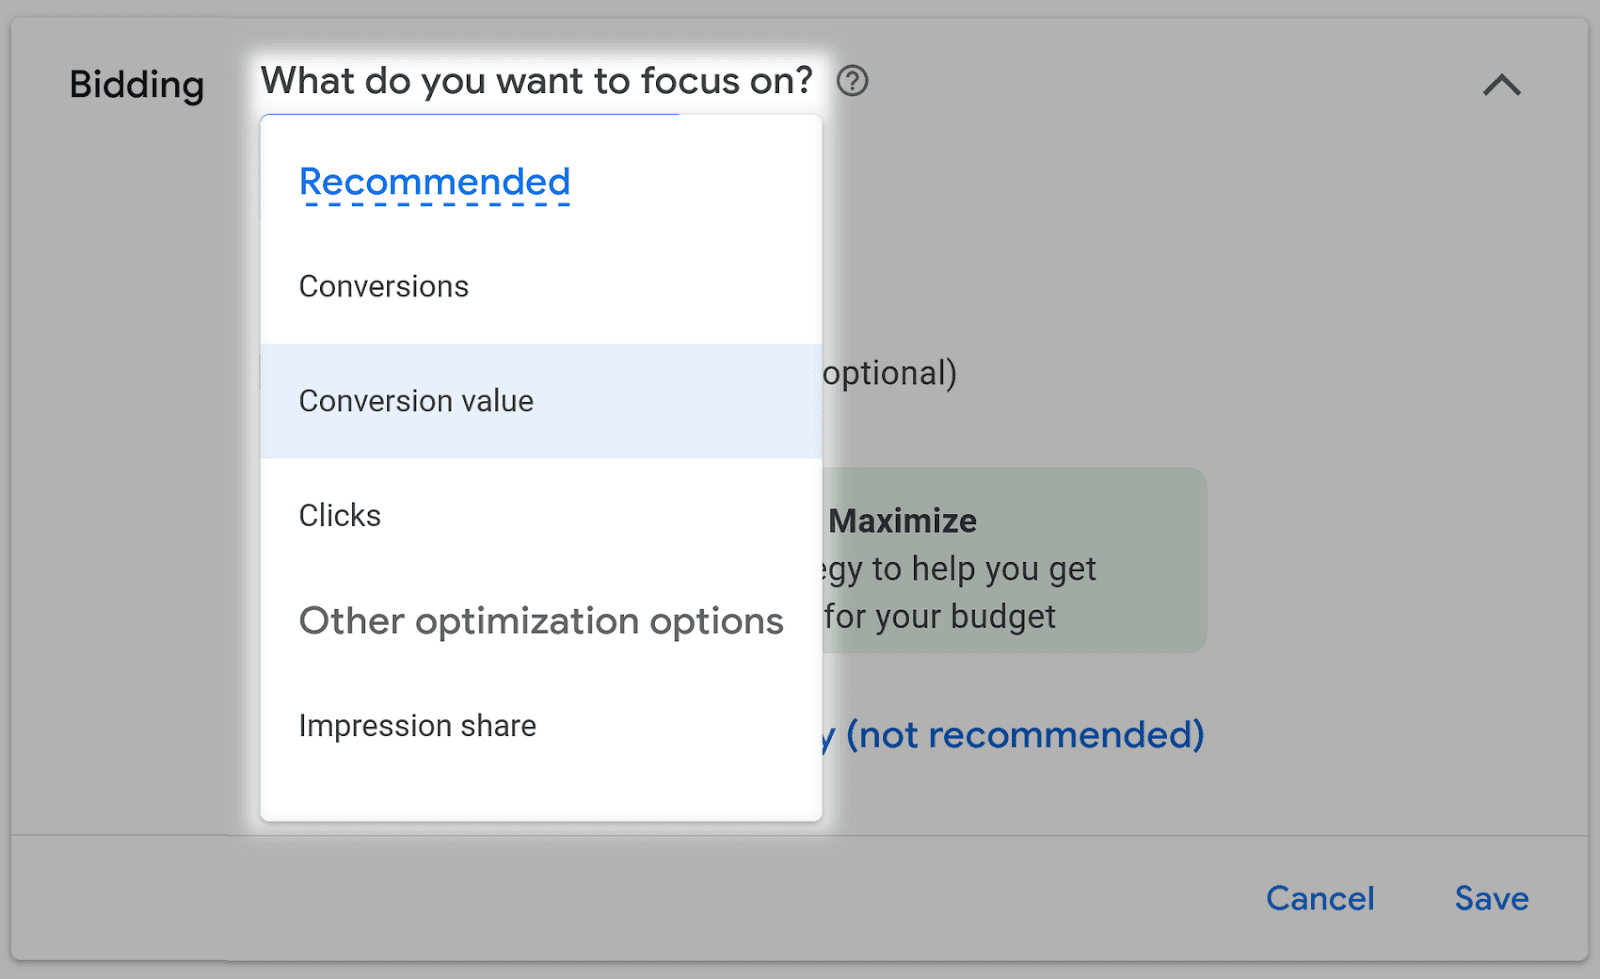 "Conversion value" selected under desired strategy drop-down